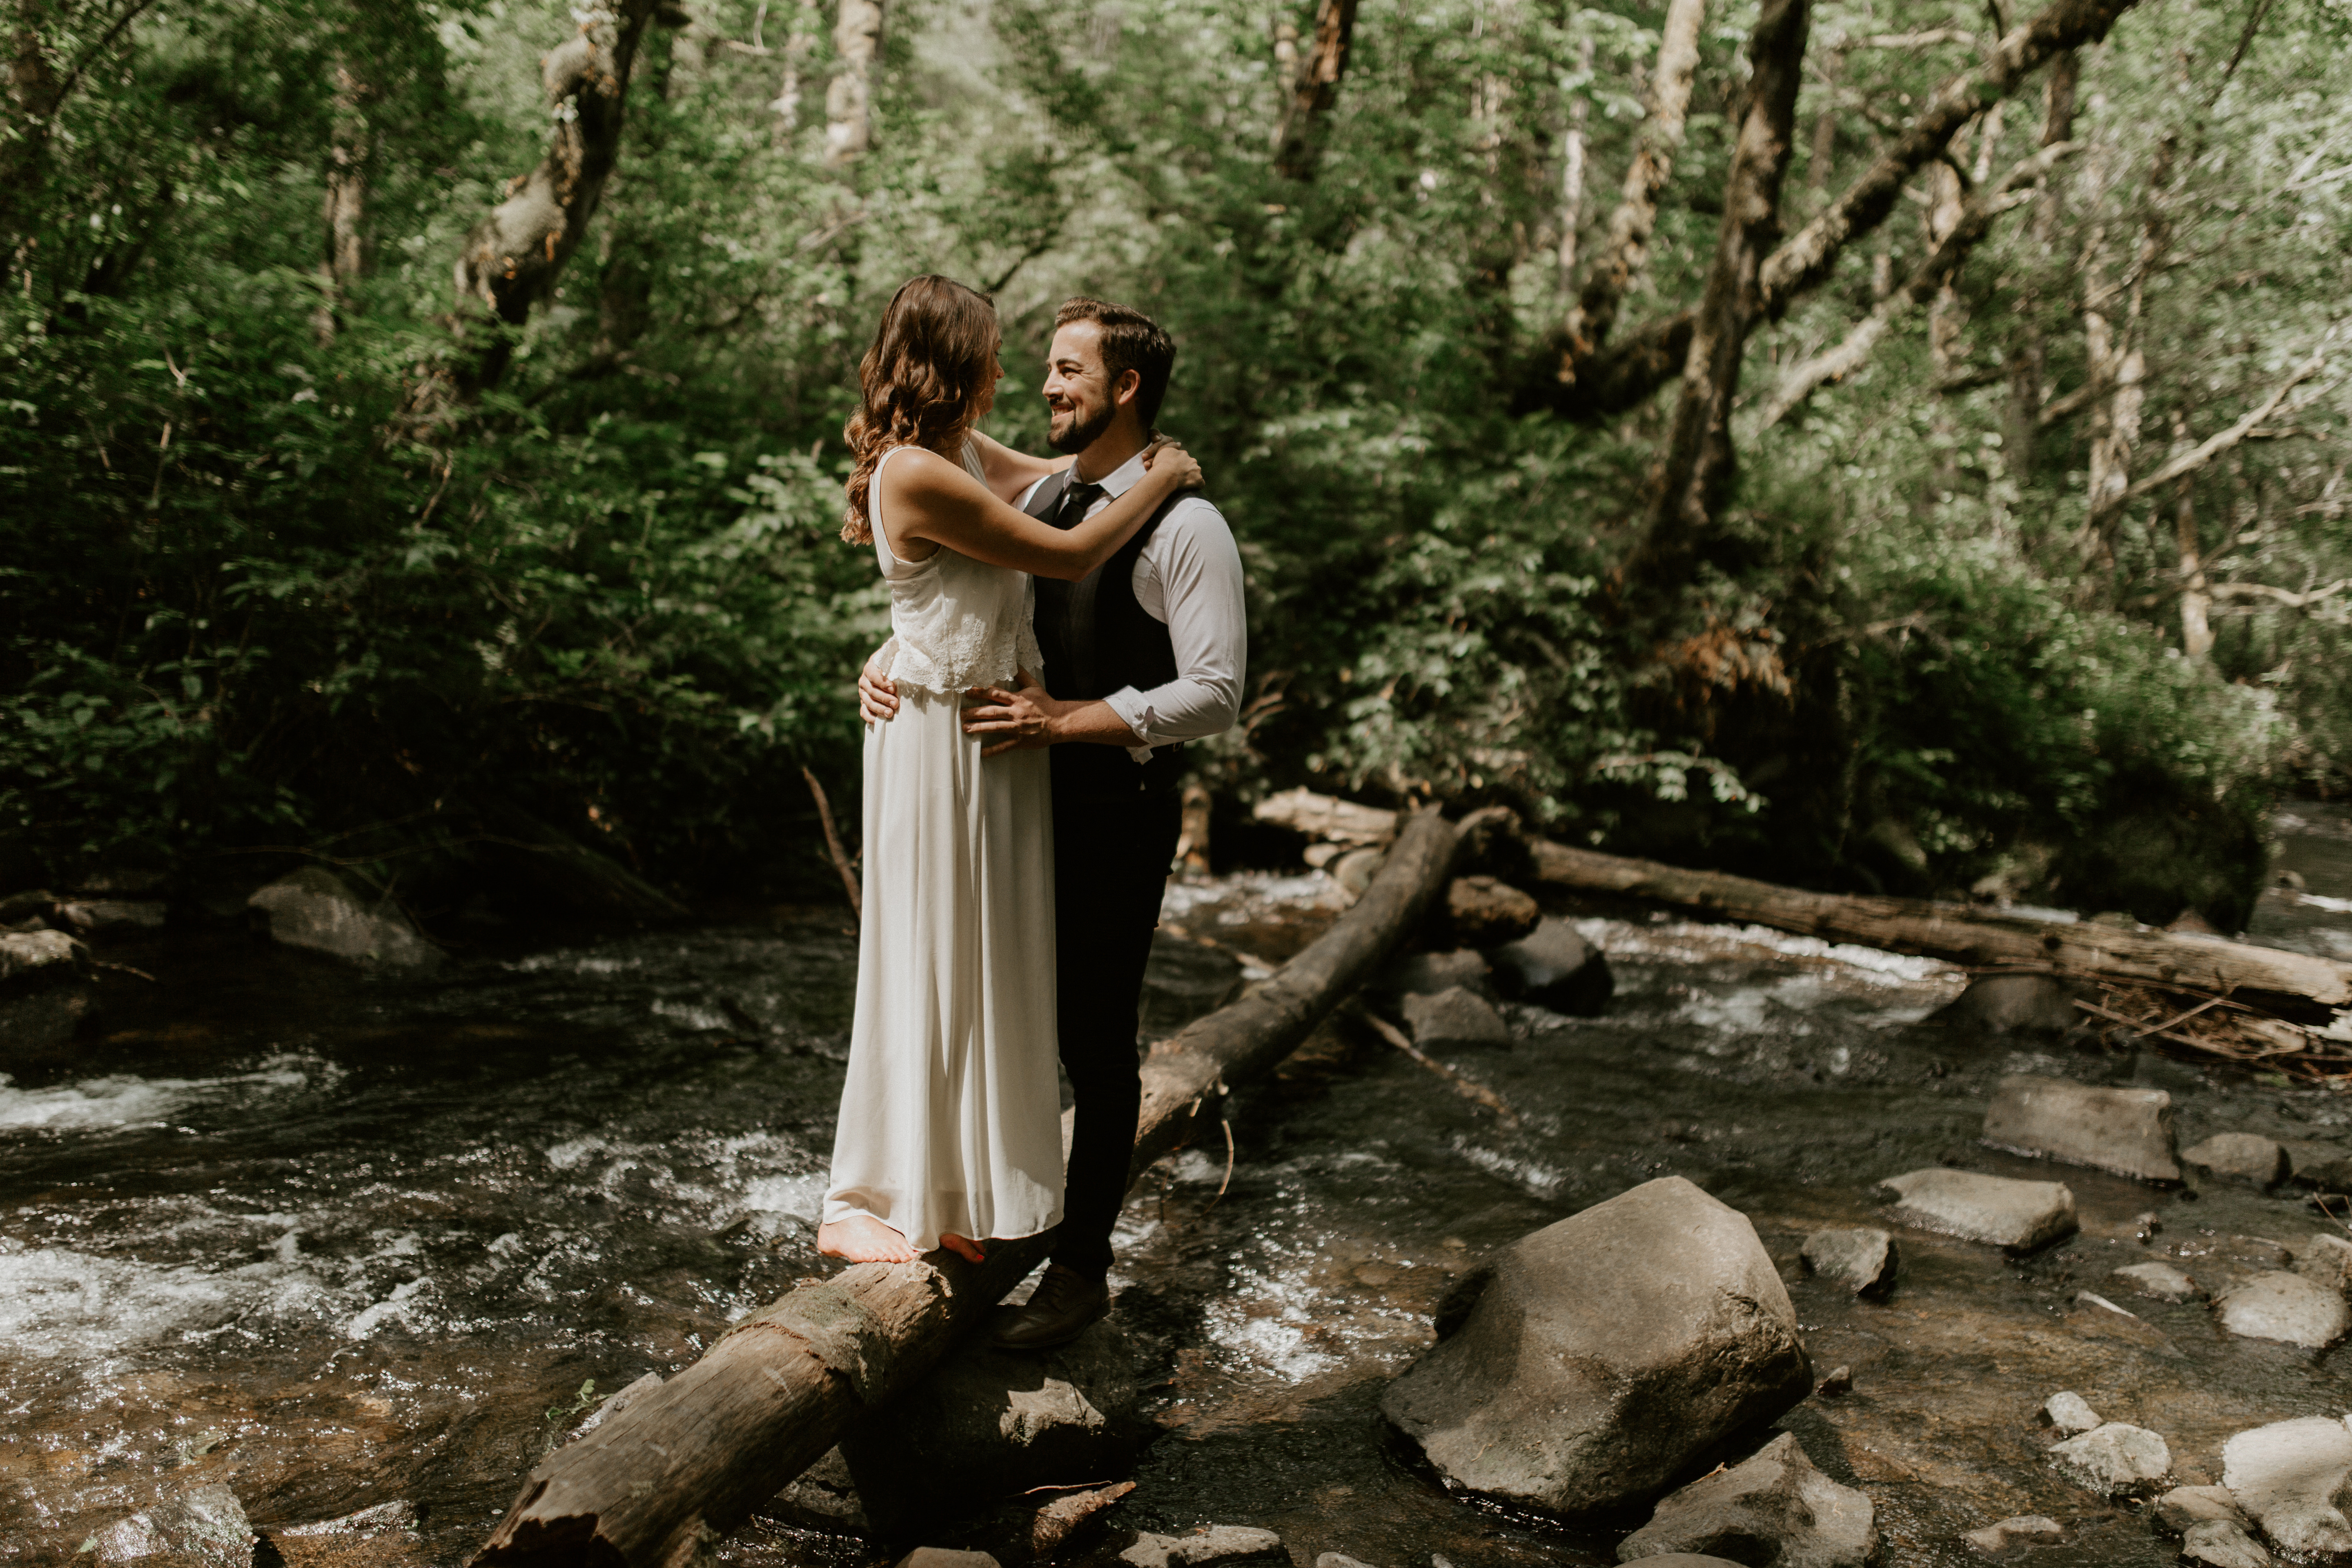 Emily and Josh hug in the Columbia River Gorge, Oregon. Elopement photography in Portland Oregon by Sienna Plus Josh.